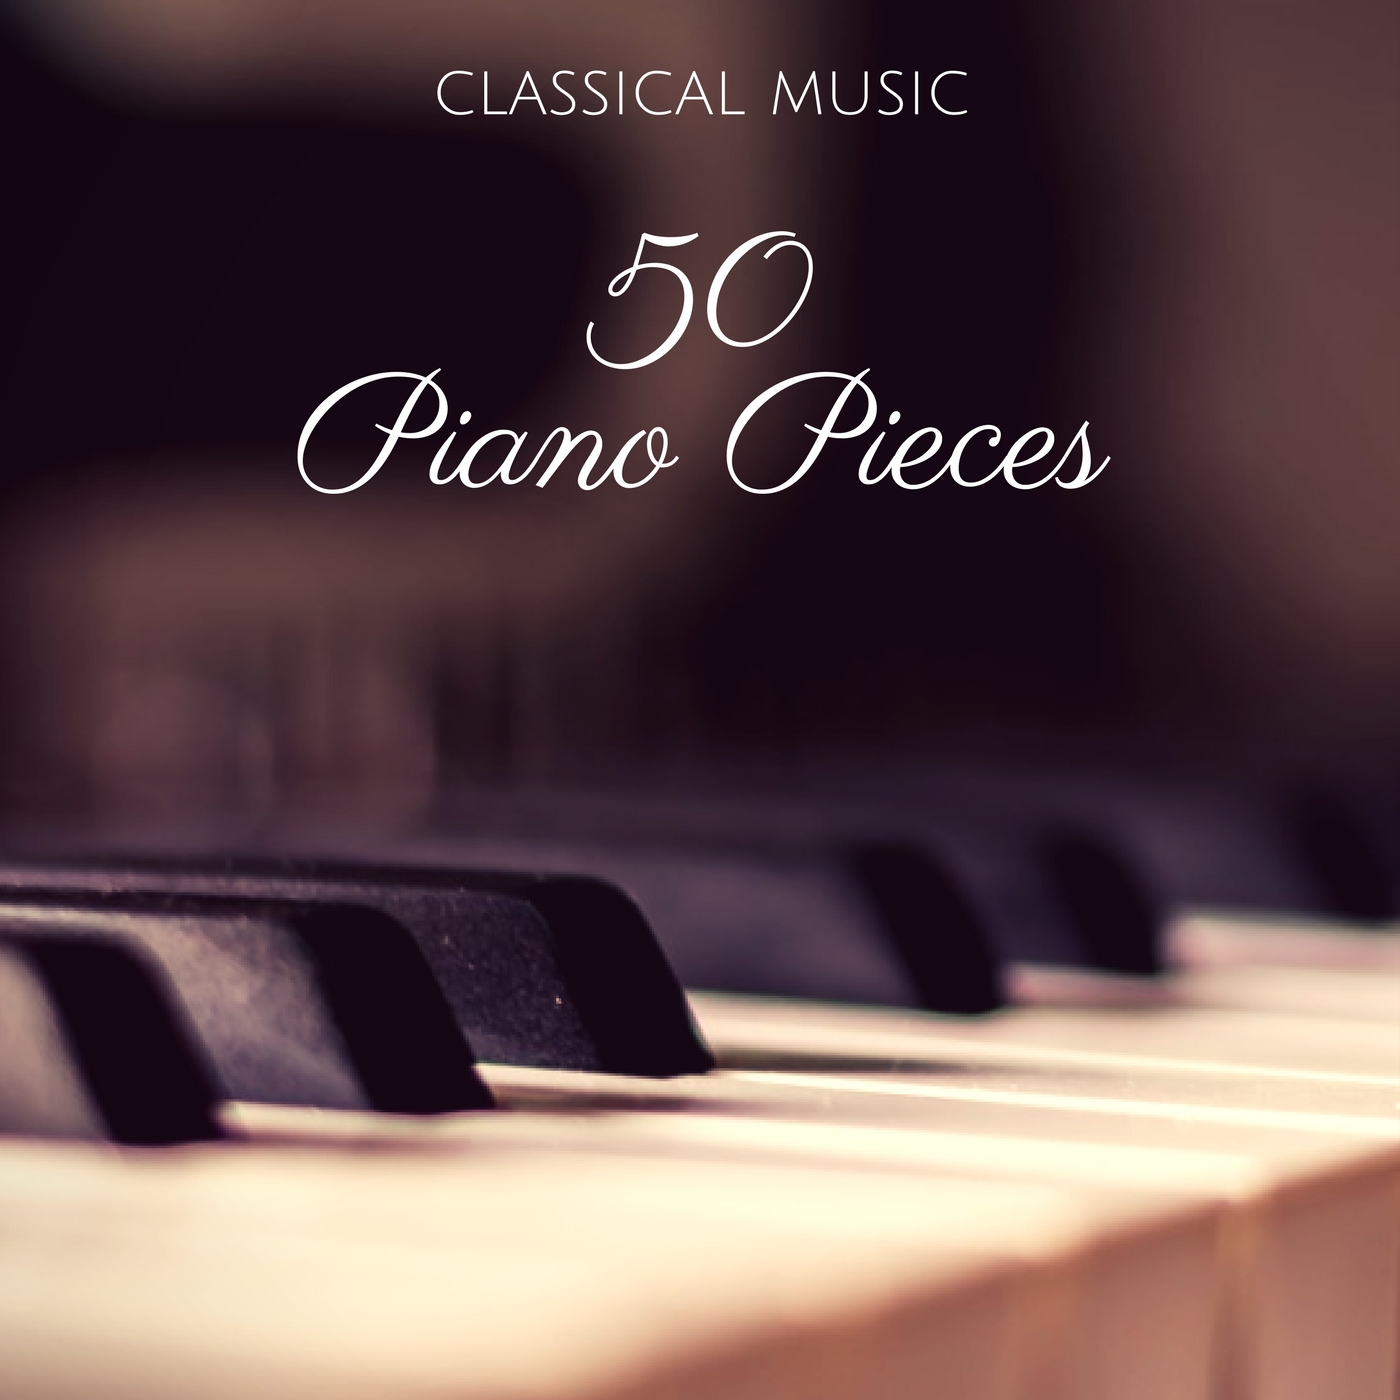 50 Piano Pieces | Classical Music